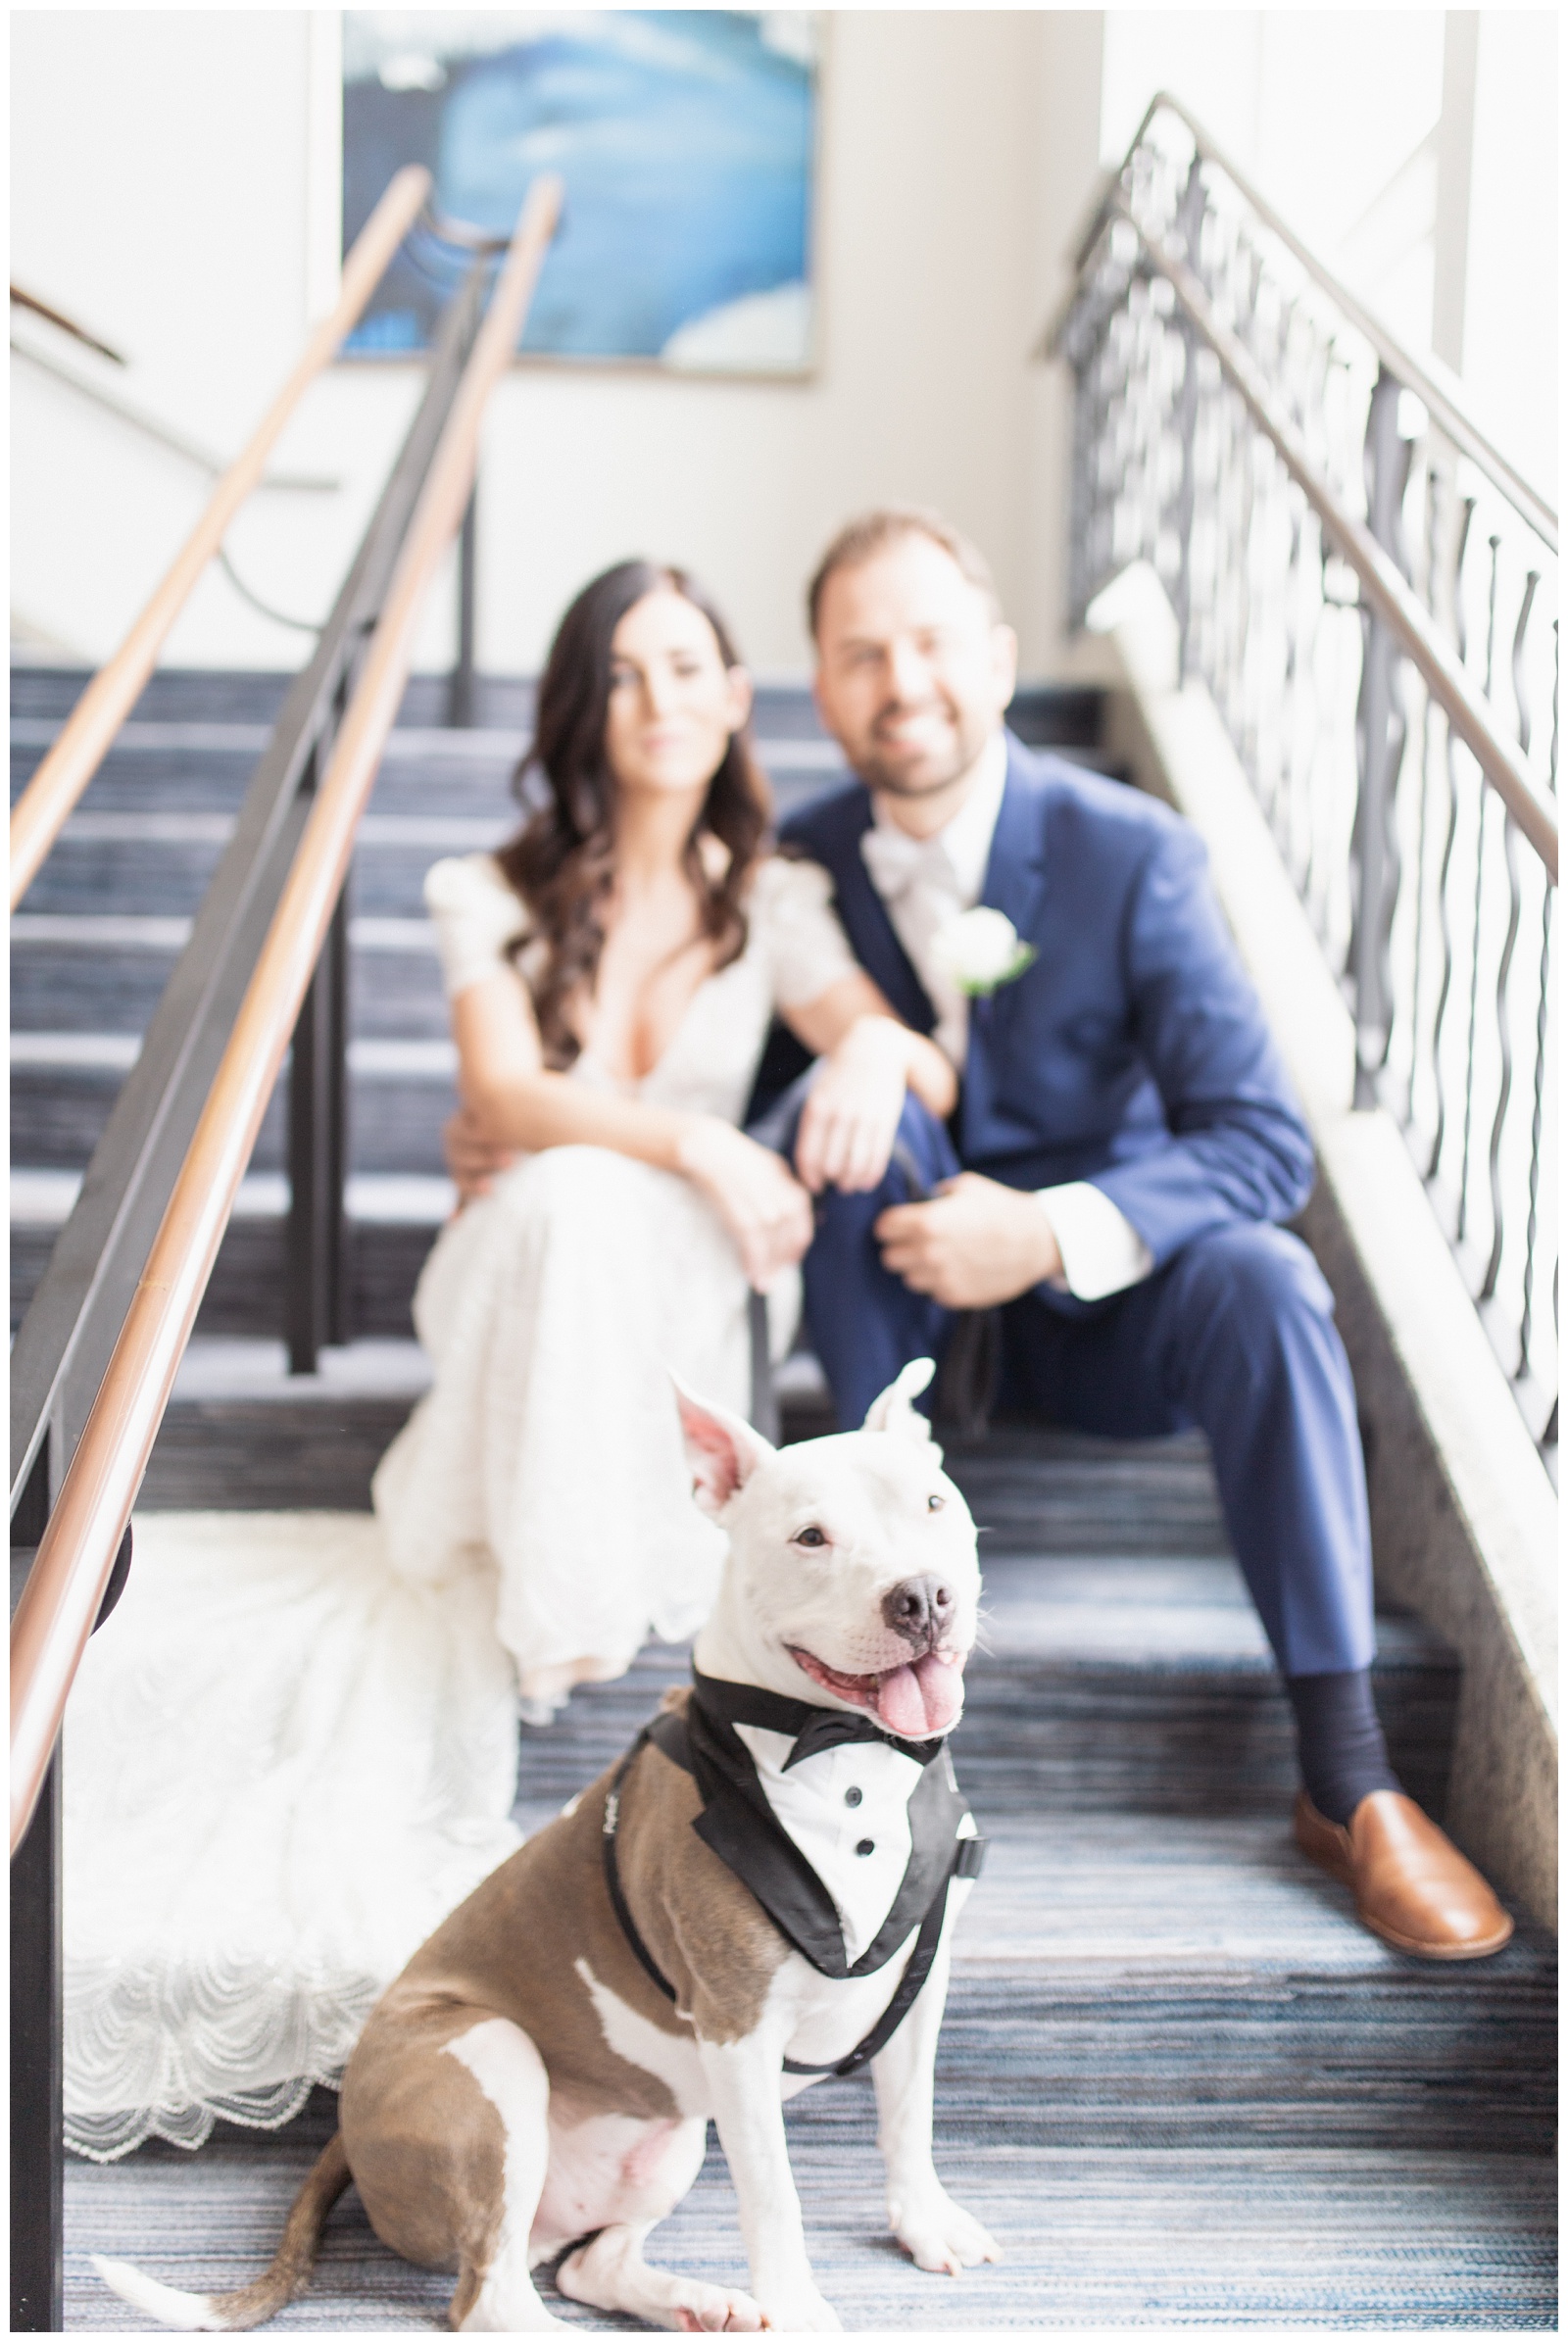 Bride and groom with dog | Matlock and Kelly Photography